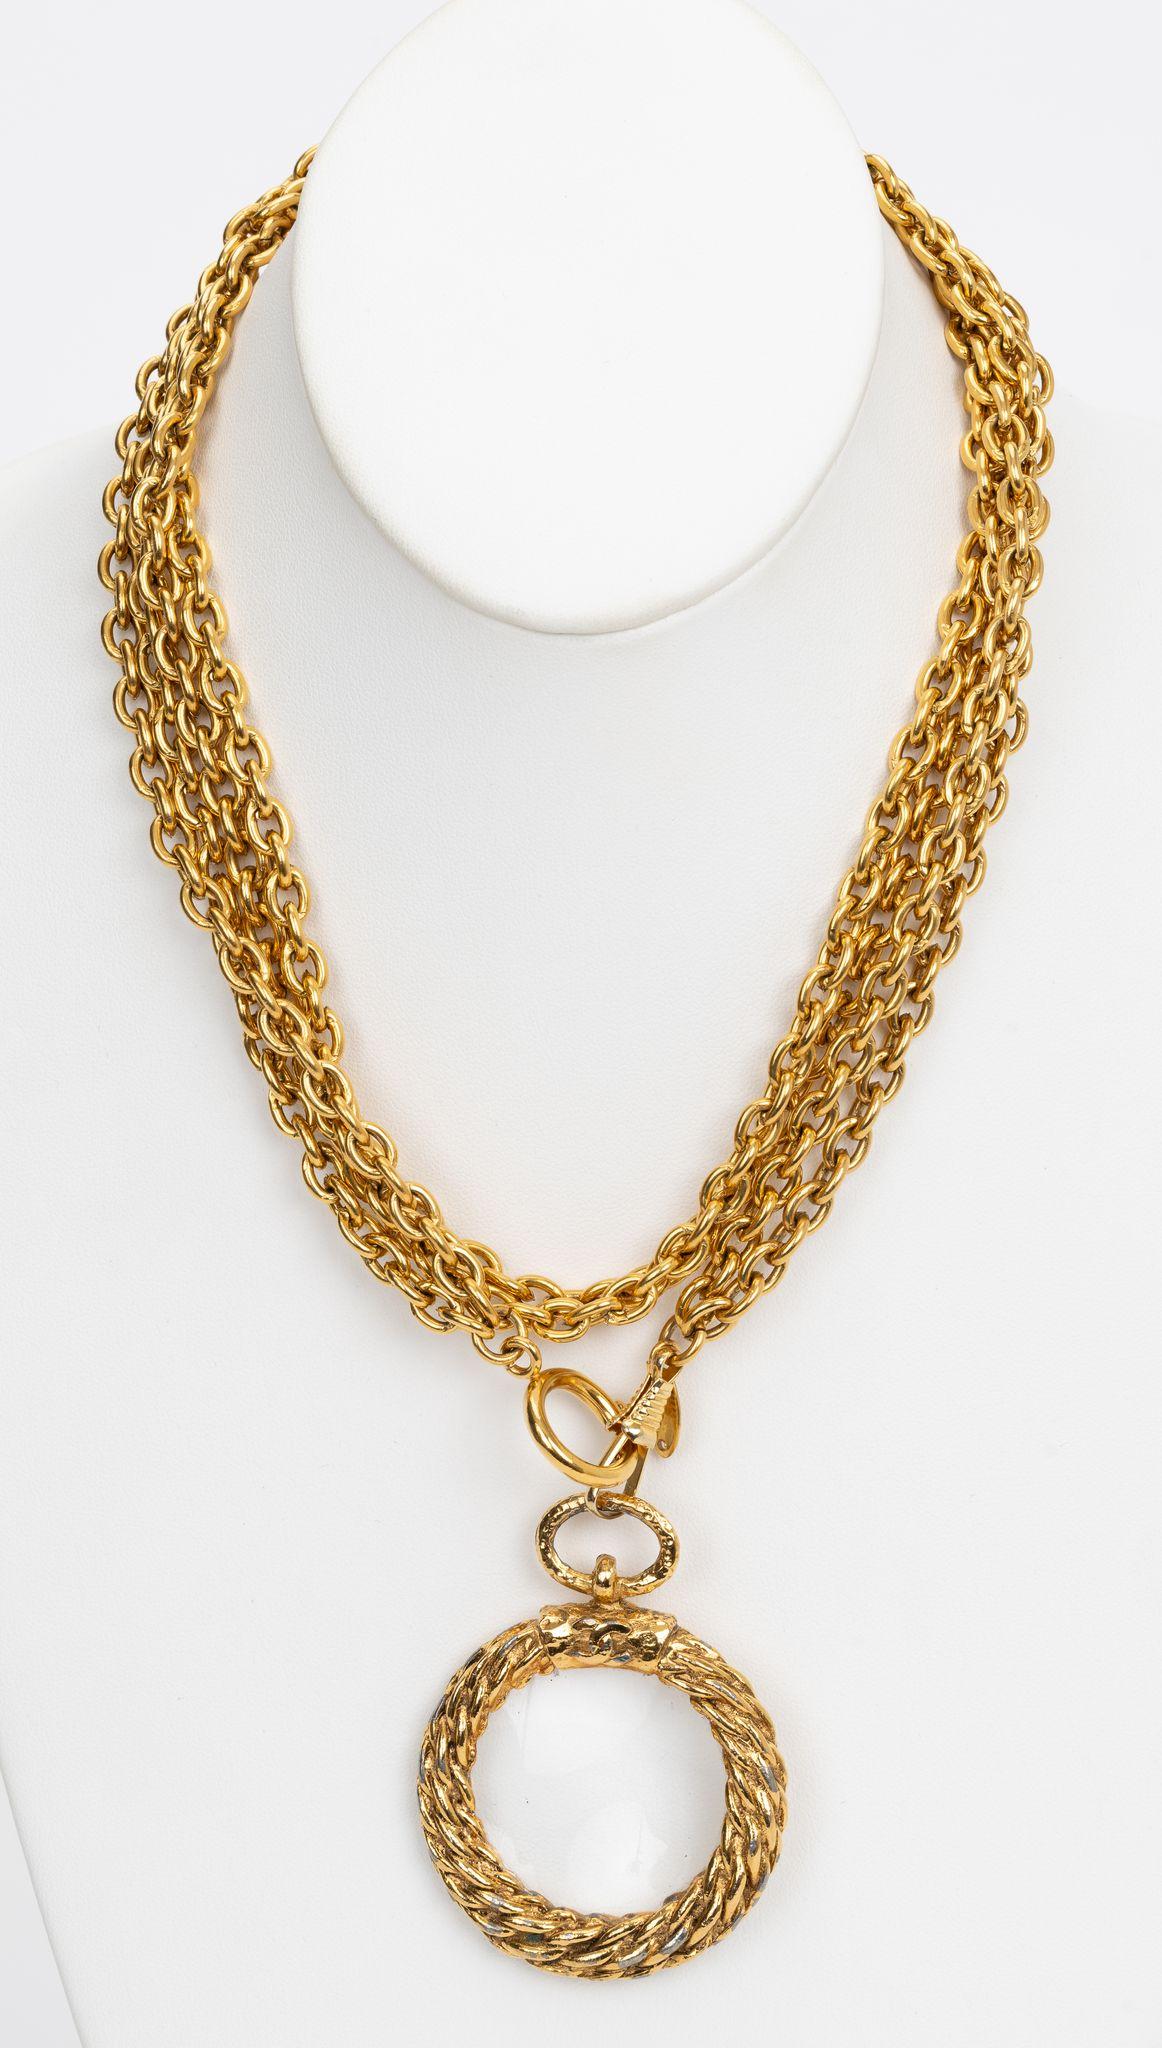 Chanel Cocomark Loupe Necklace is a beautiful long gold plated necklace. Double chain, can be worn long or doubles short.  A definite statement piece. Pendant 2.5” x 2”. Minimum wear on pendant, please refer to photos. Comes with original duster or